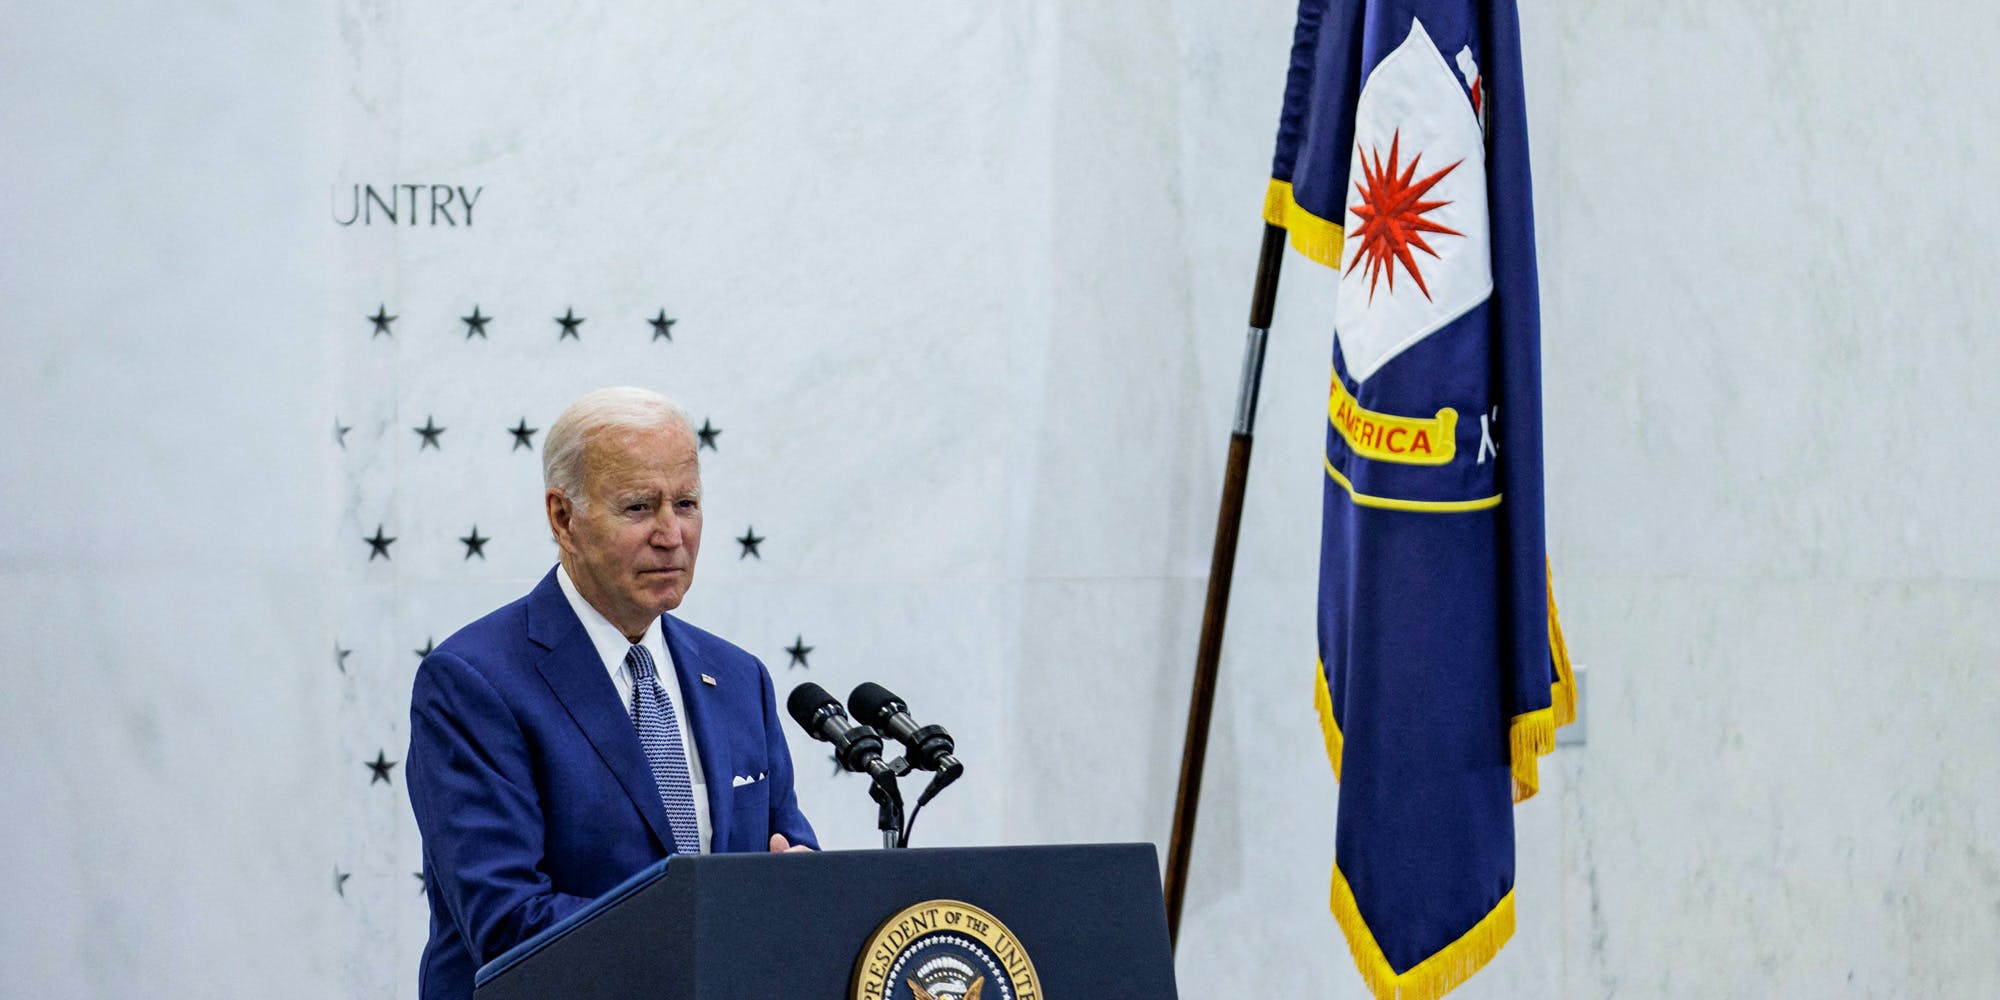 US President Joe Biden speaks during a visit at the Central Intelligence Agency (CIA) headquarters in Langley, Virginia, on July 8, 2022.